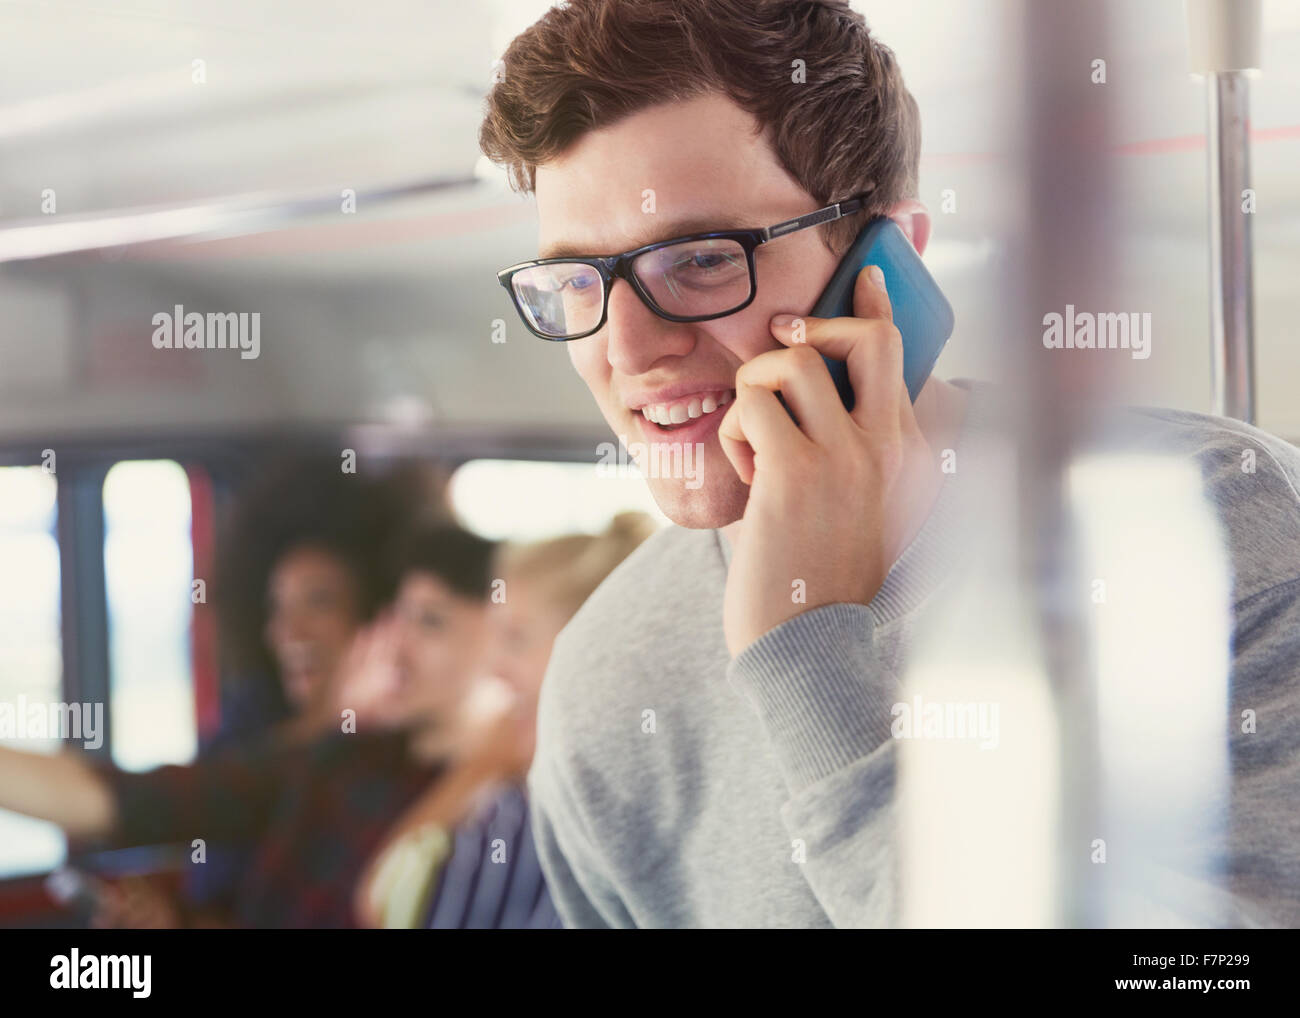 Smiling man with eyeglasses on cell phone on bus Banque D'Images